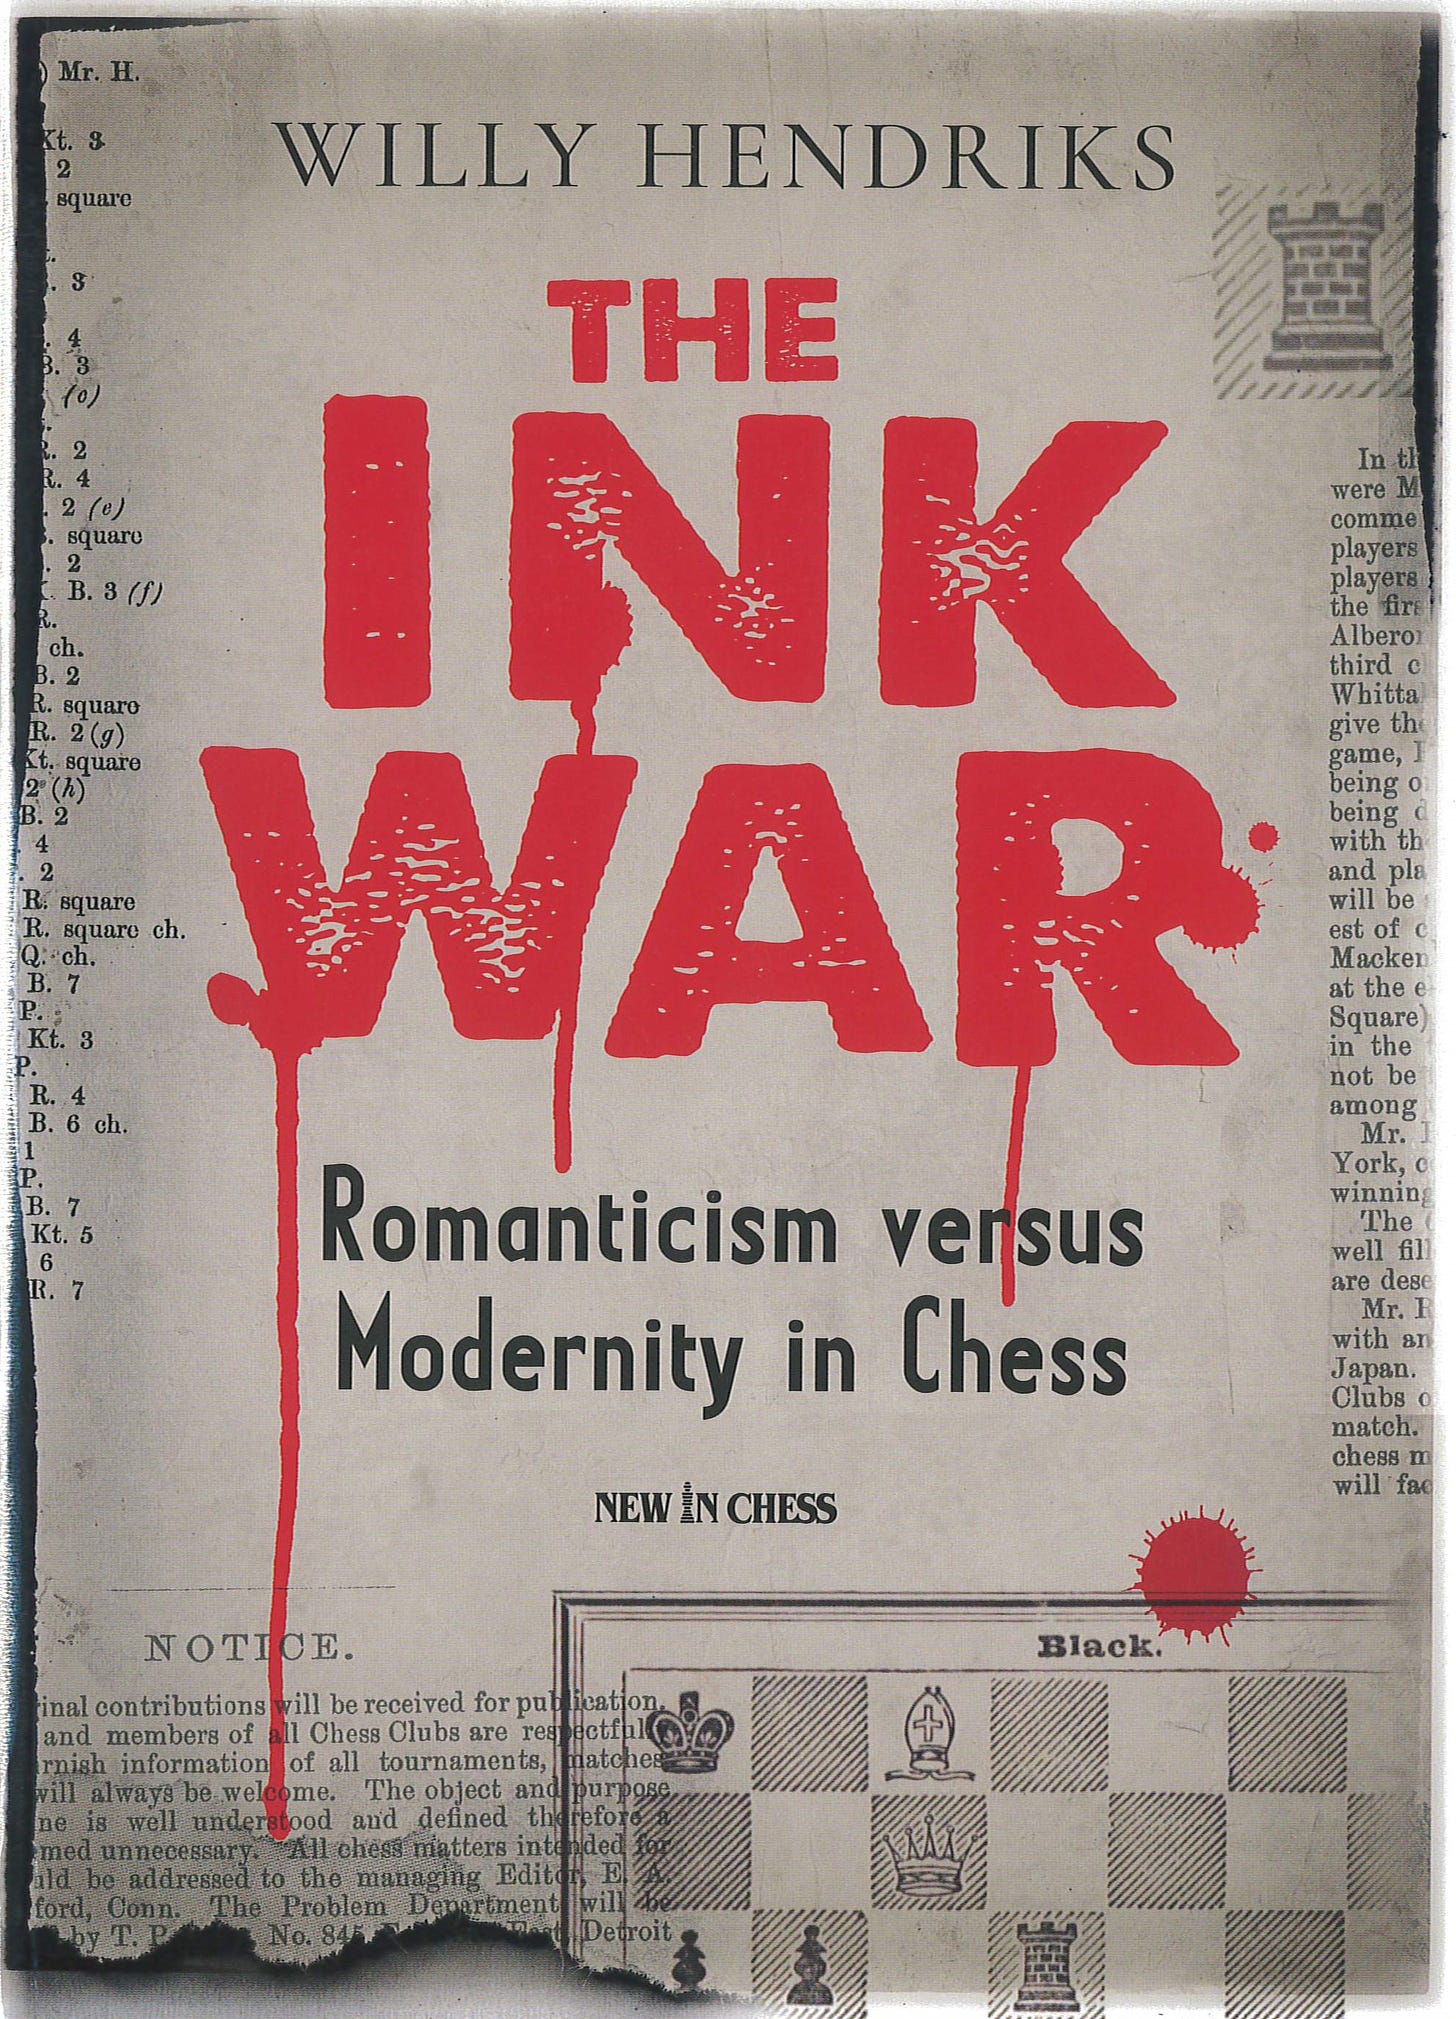 Willy Hendriks: The Ink War